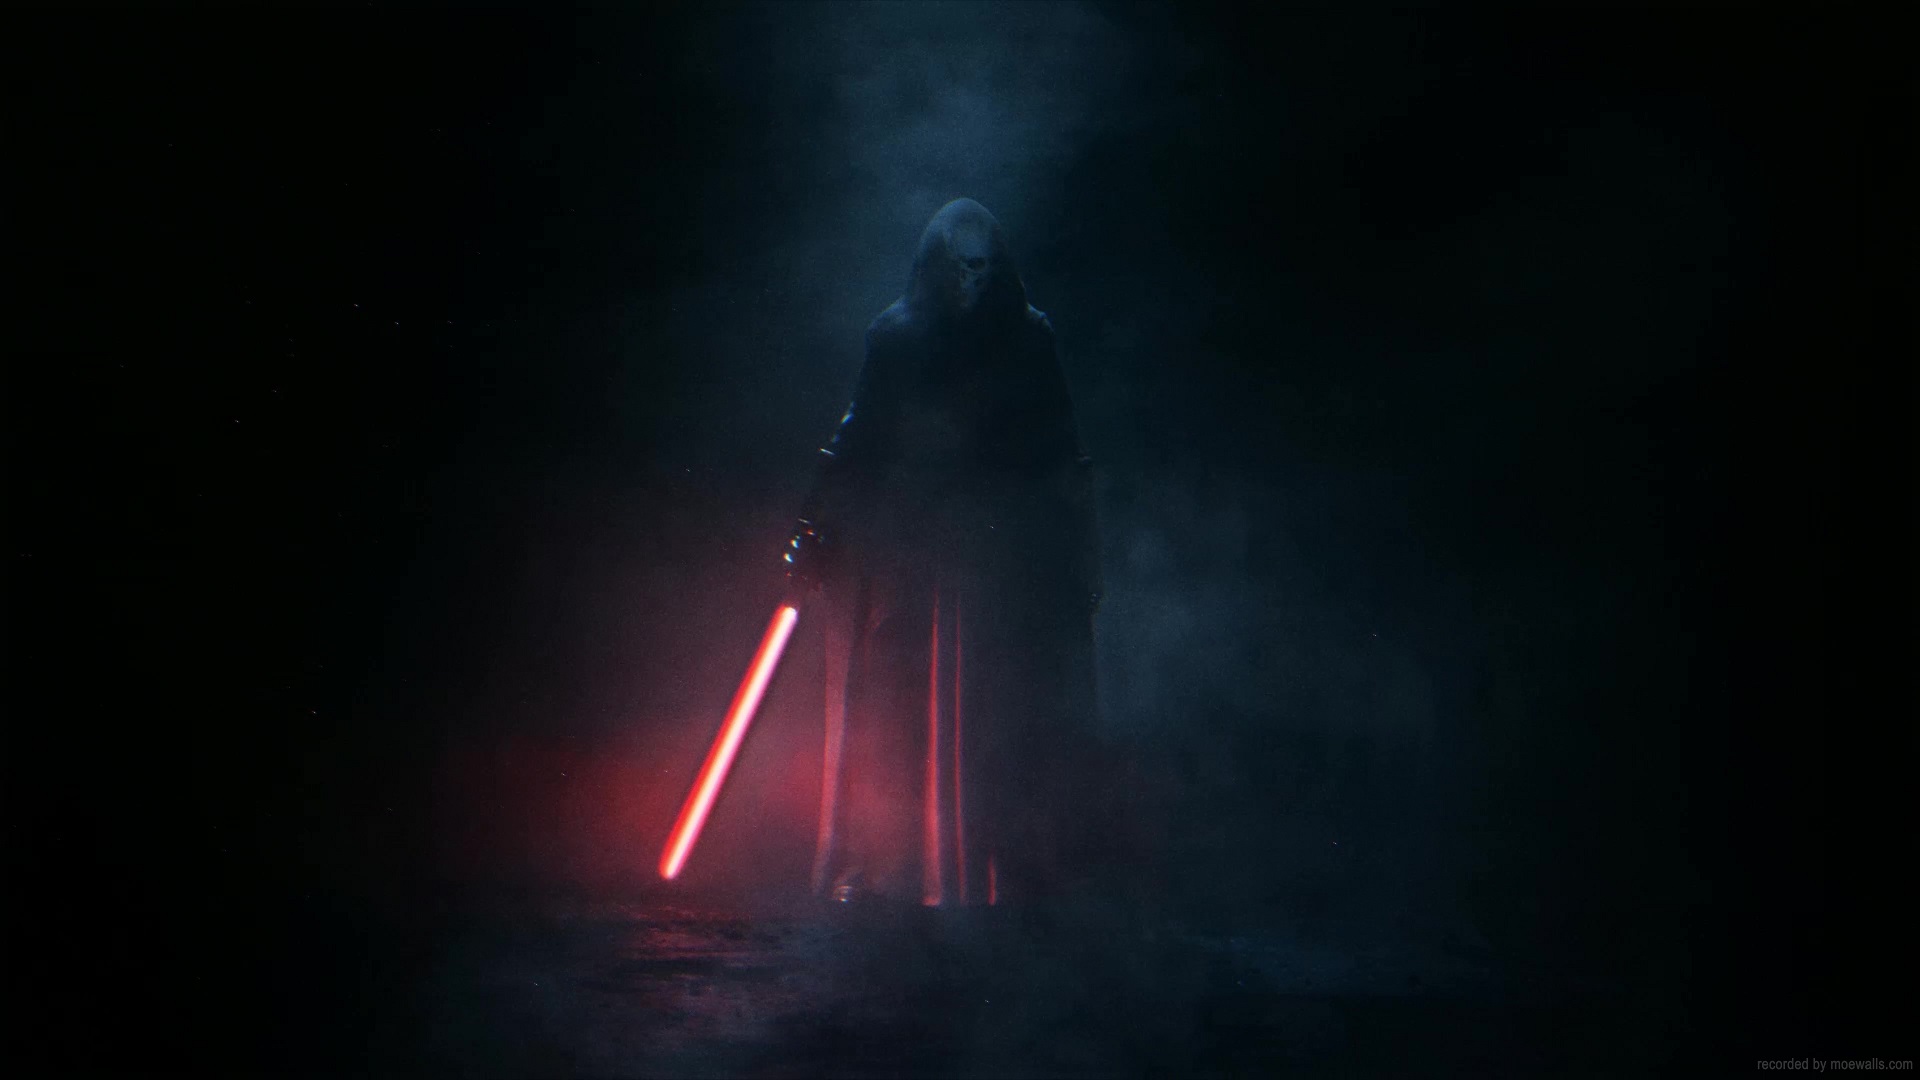 40 Red Lightsaber HD Wallpapers and Backgrounds